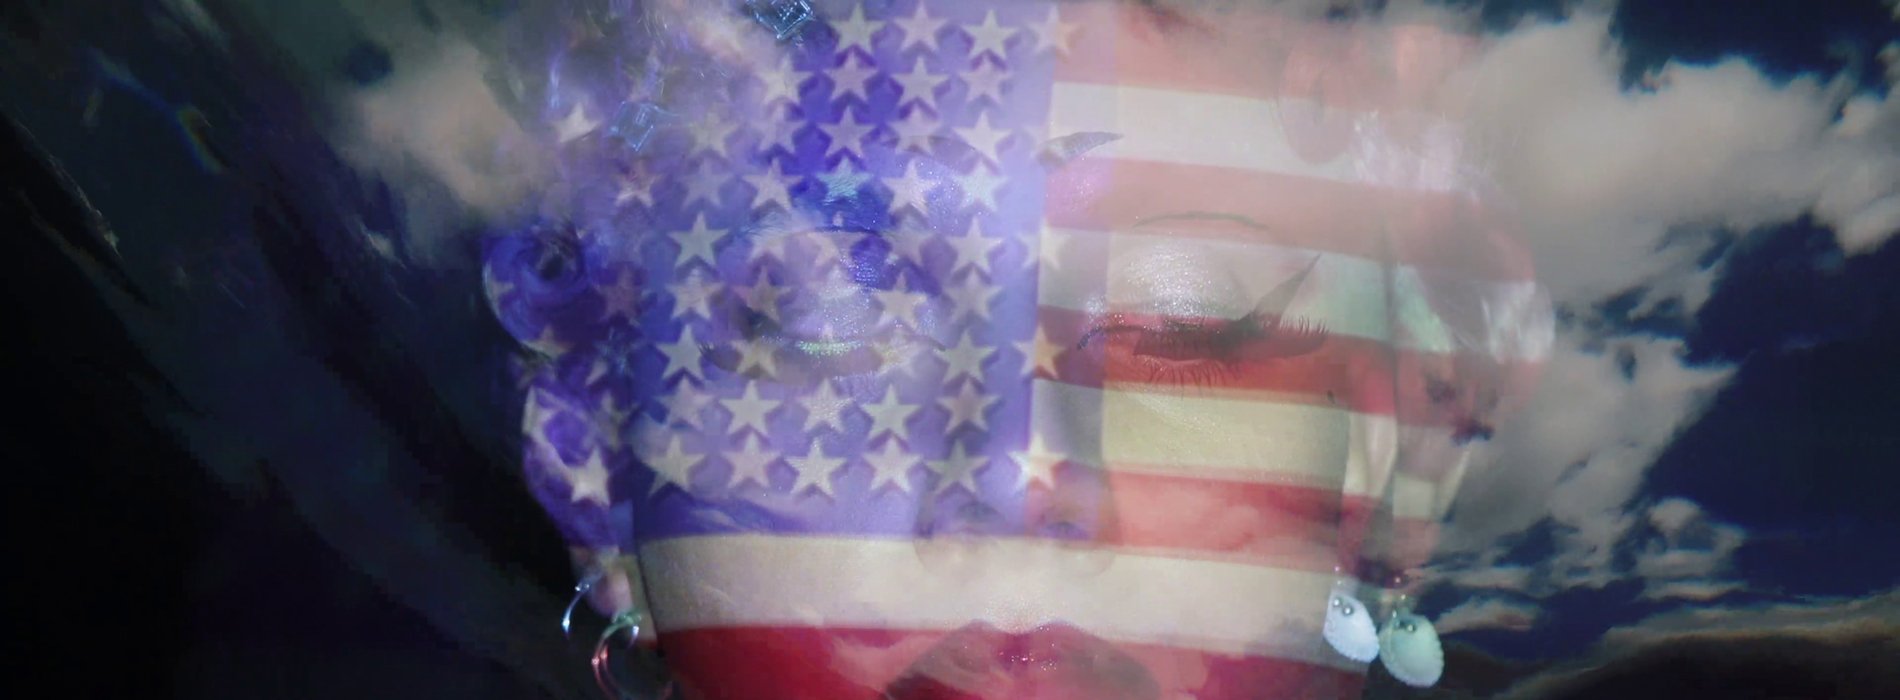 Drag performer with a projection of the US flag on their face